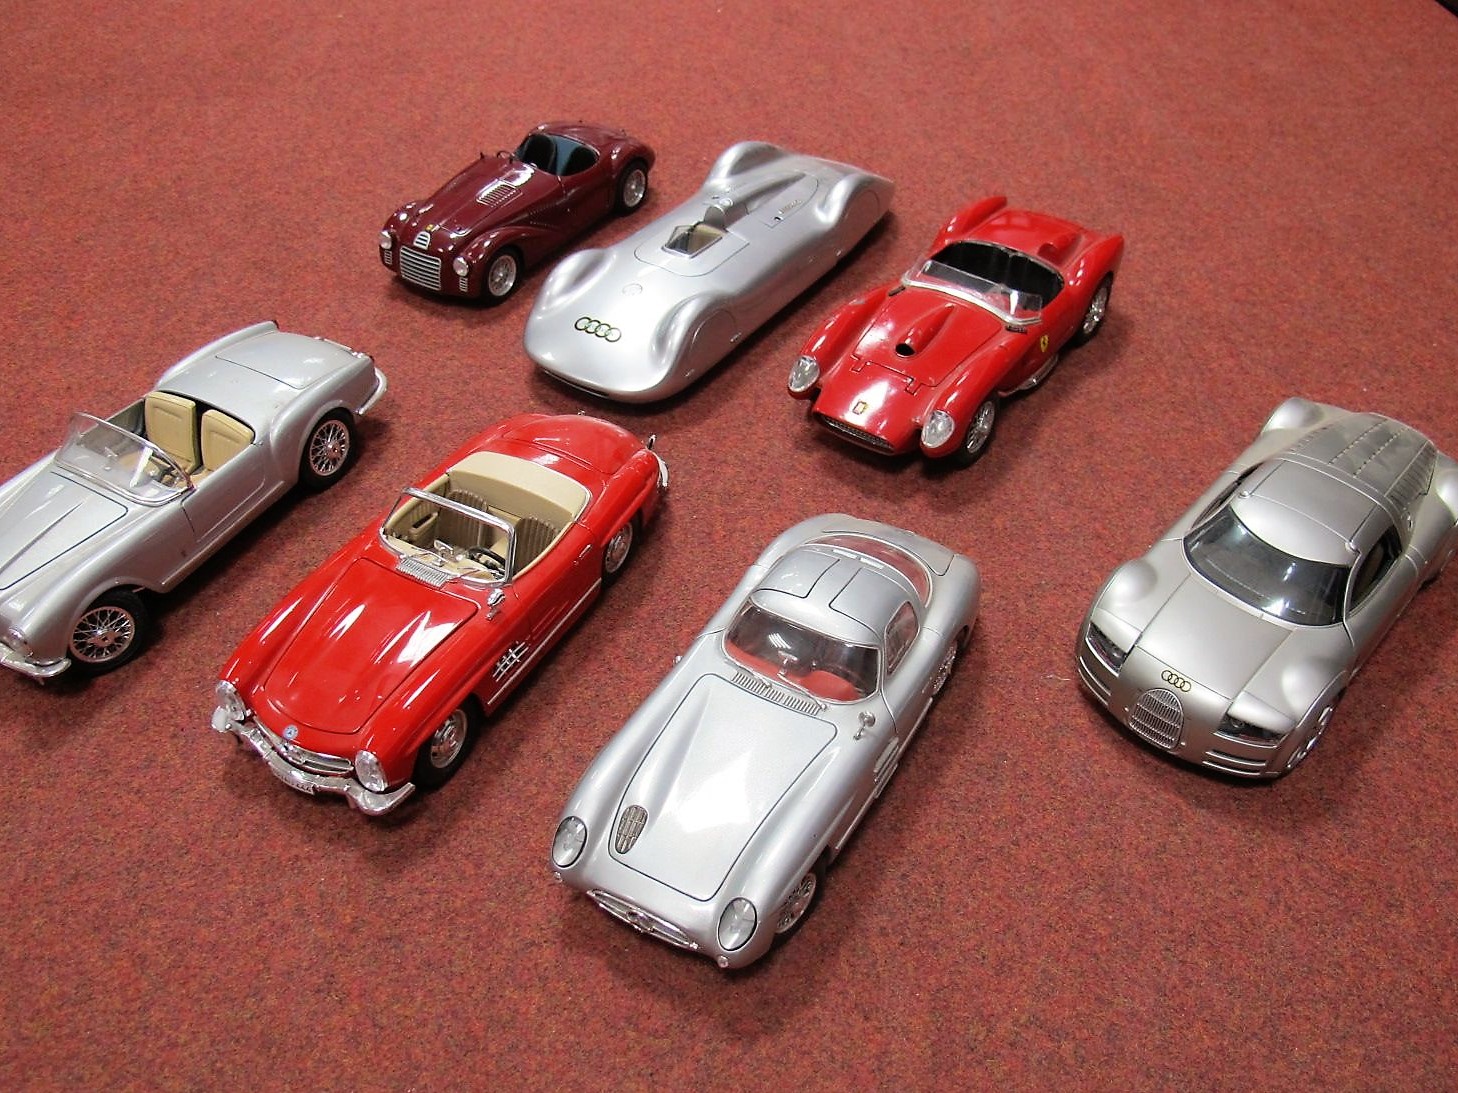 Seven 1:18th Scale Highly Detailed Diecast Model Cars, by Revell, Hot Wheels, Maisto and Burago.